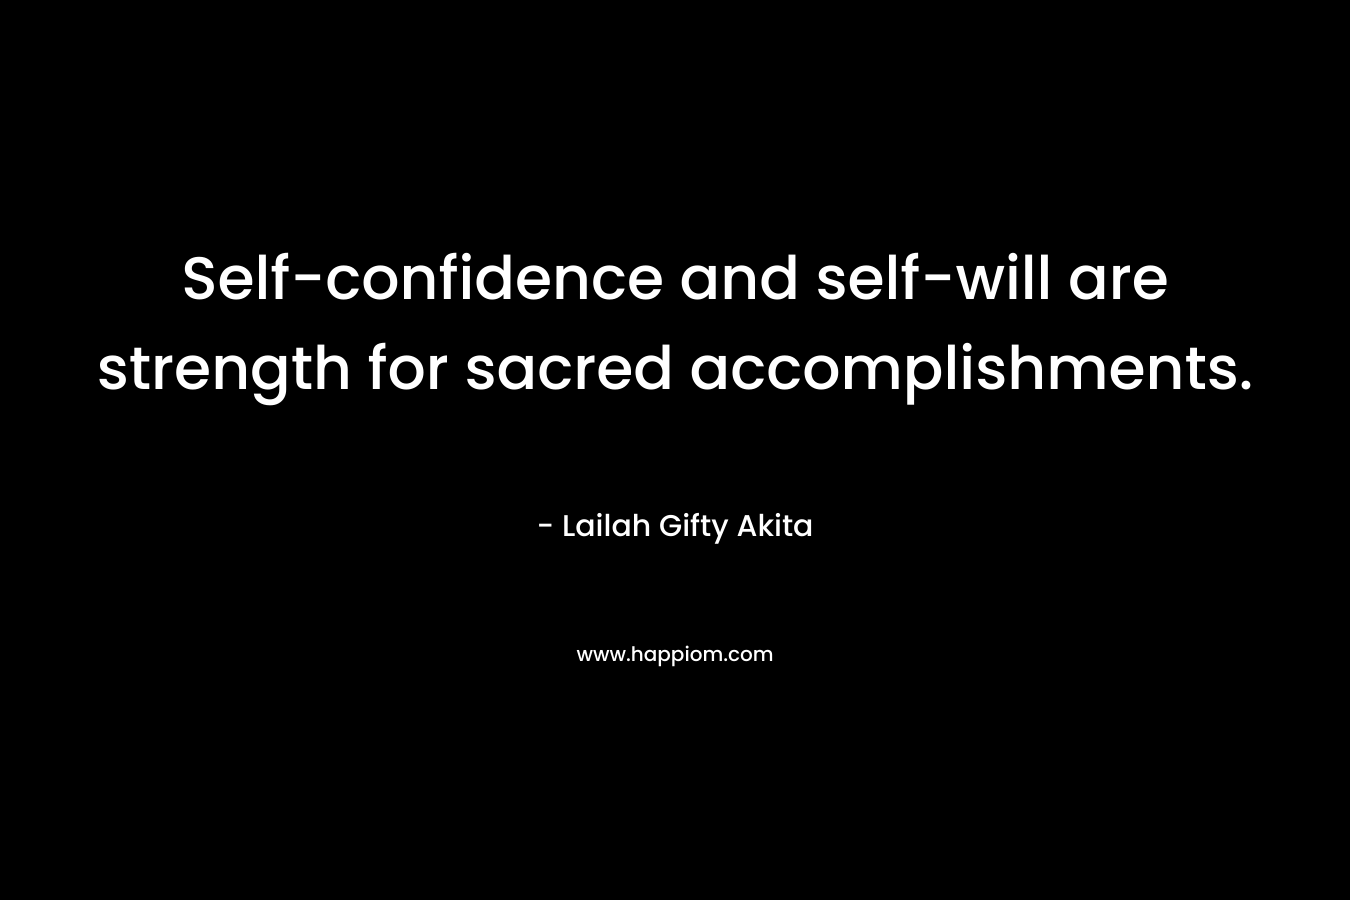 Self-confidence and self-will are strength for sacred accomplishments.